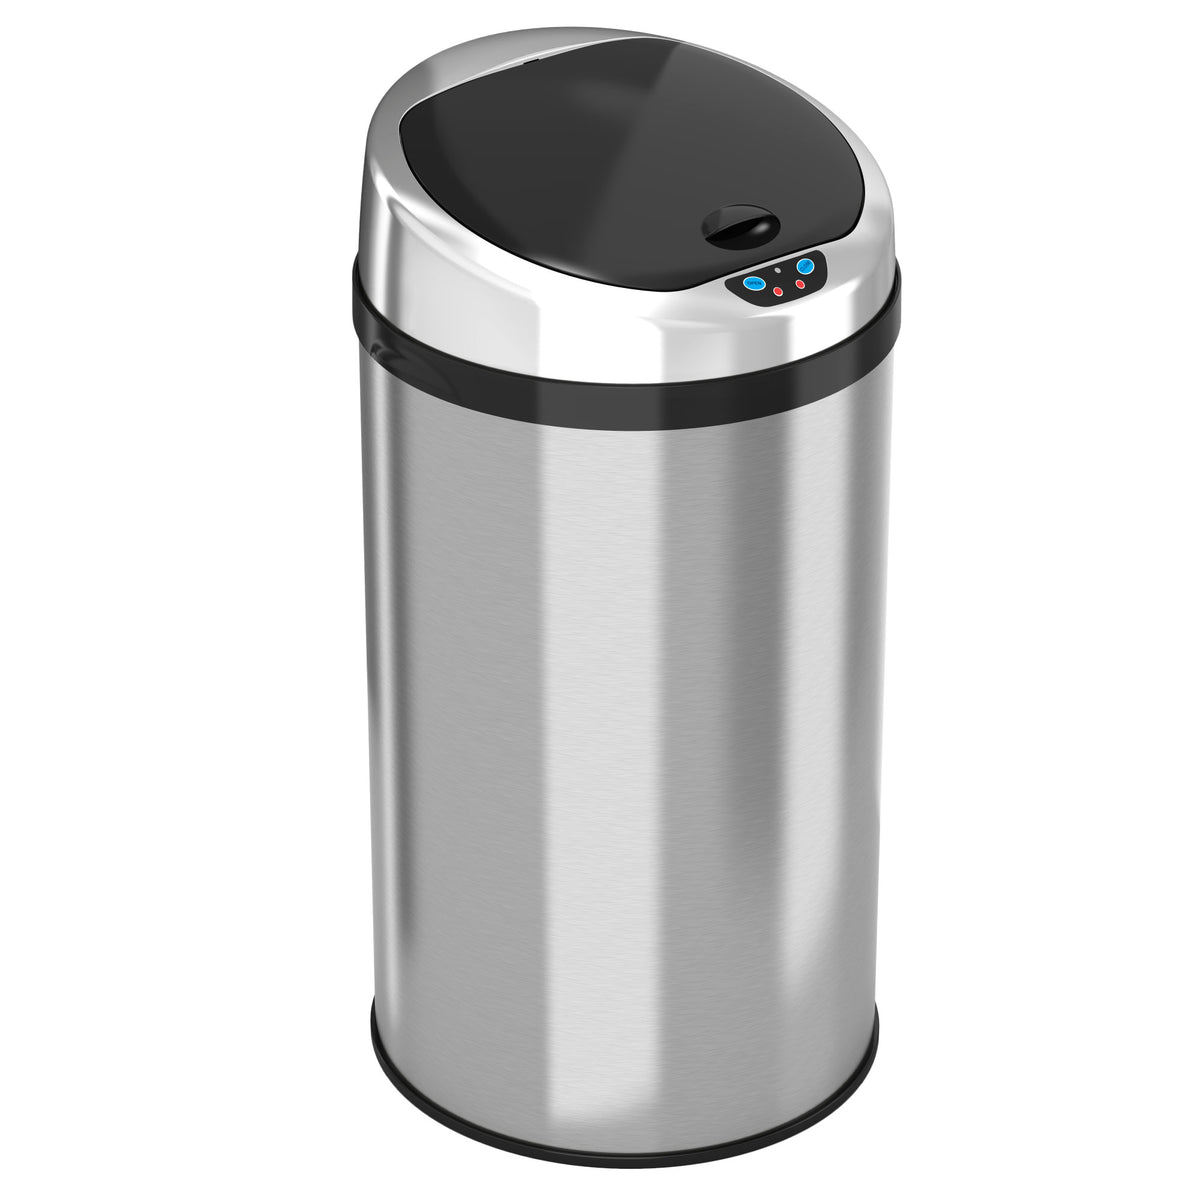 iTouchless 8 Gallon Stainless Steel Sensor Trash Can with Odor Filter